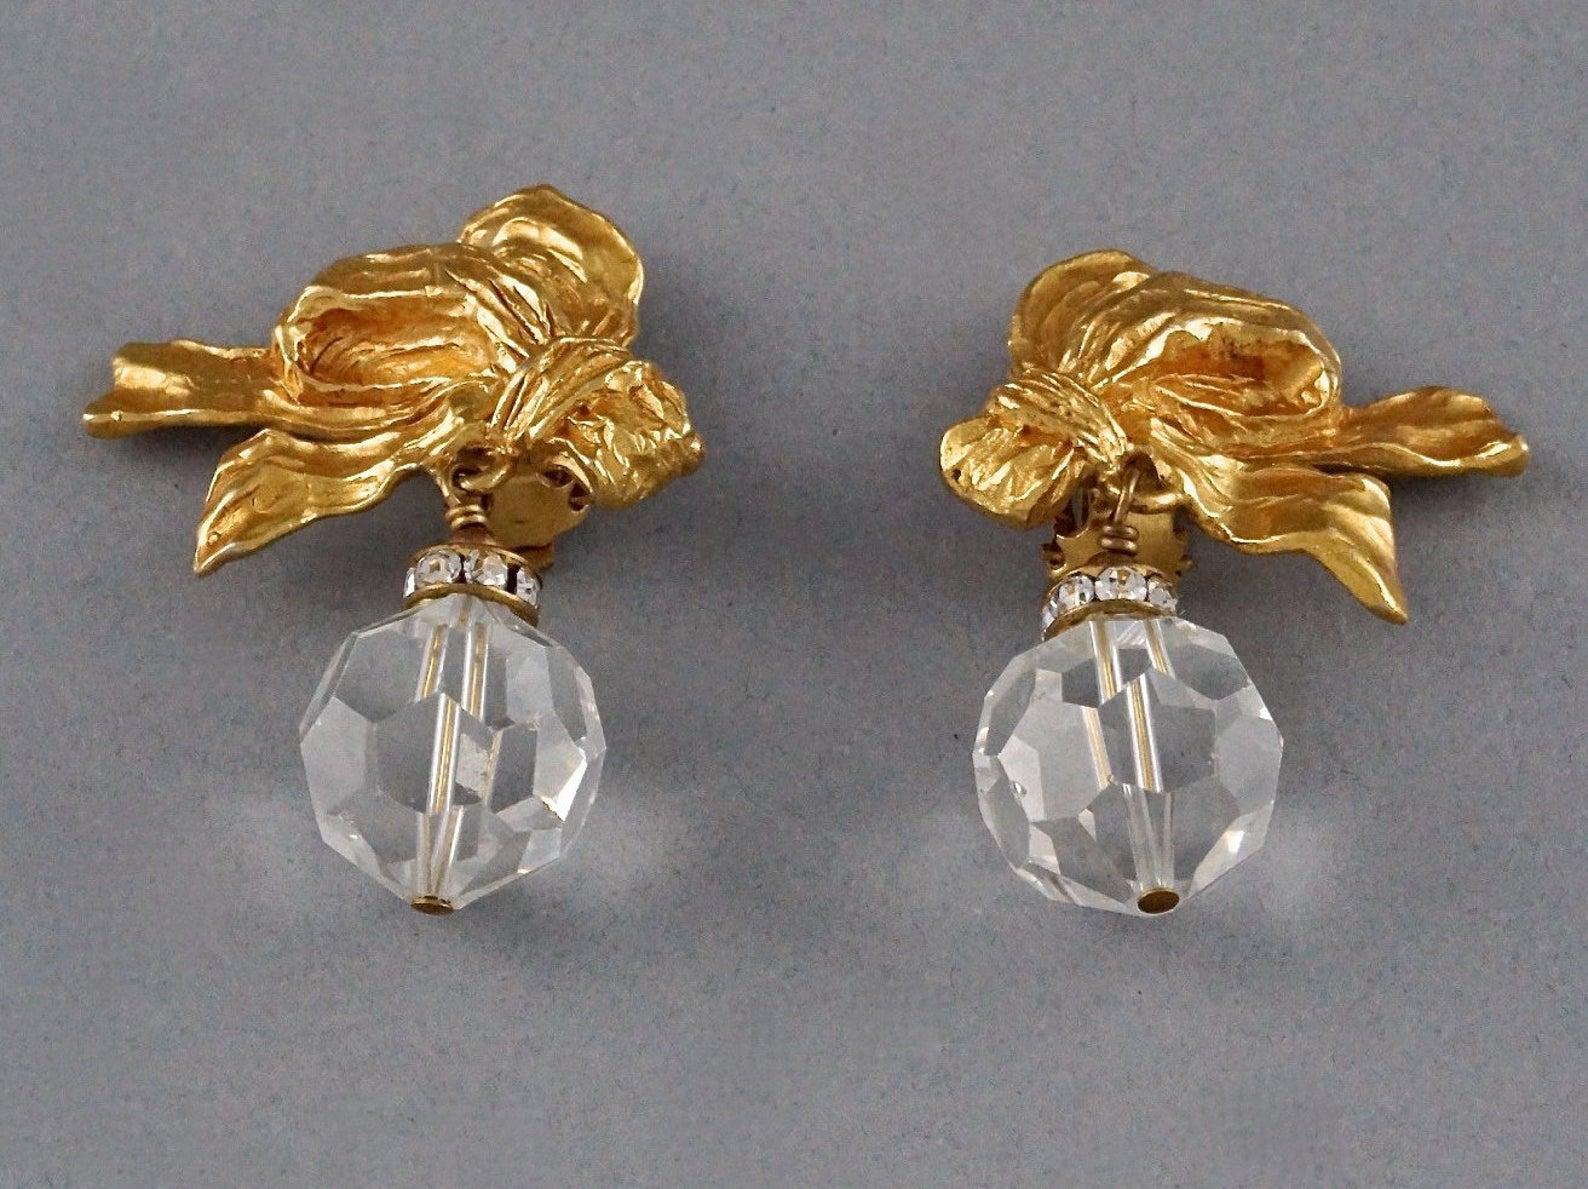 Vintage CHRISTIAN DIOR BOUTIQUE French Bow Faceted Bead Earrings 1